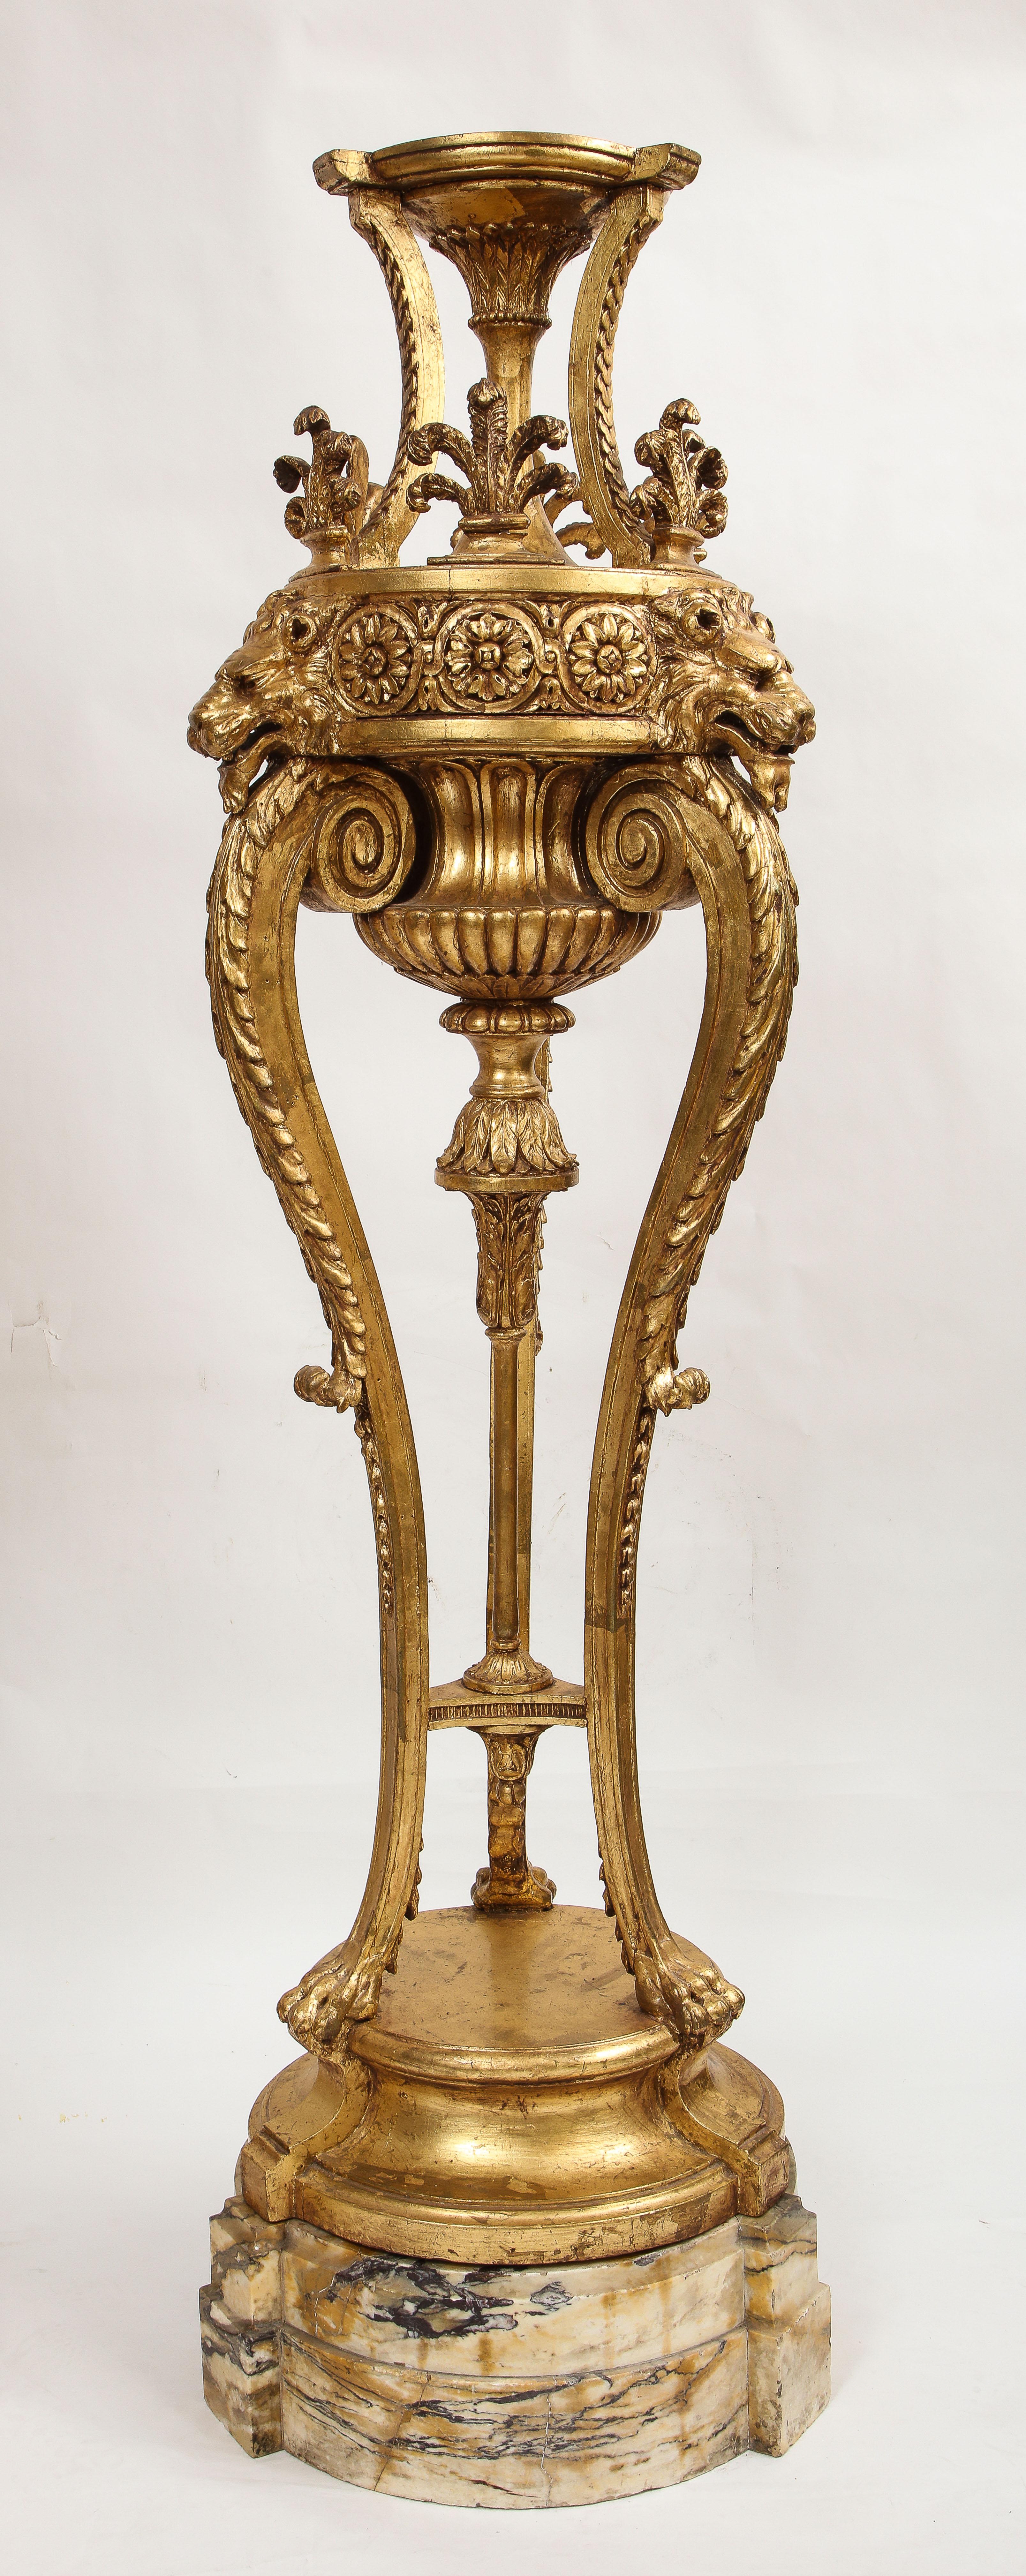 Late 19th Century A Pair of Monumental 19th Century Giltwood Torchieres with Original Marble Bases